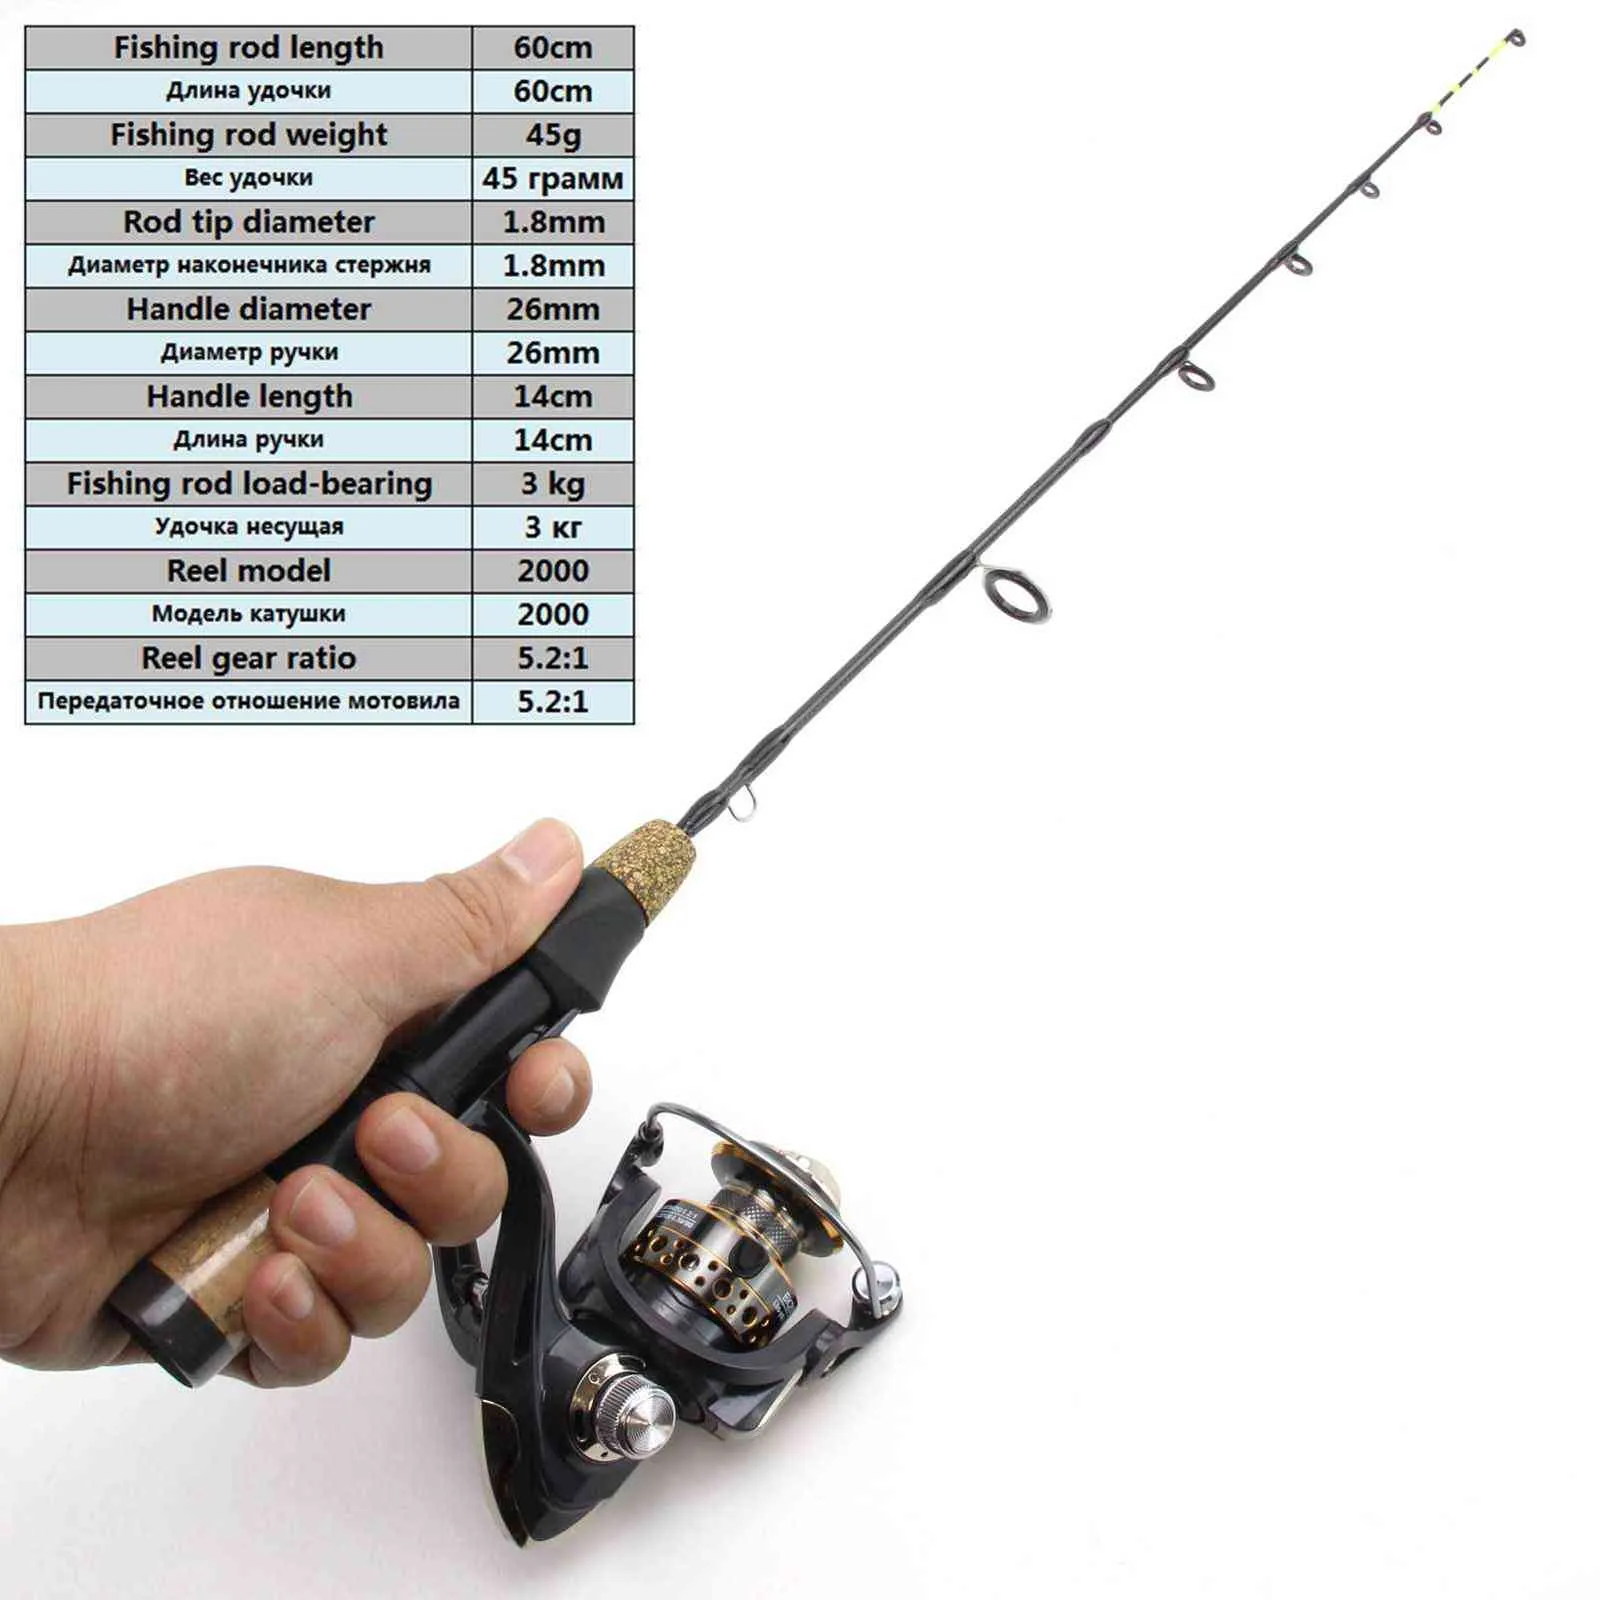 Winter Ice Fishing Set In 60cm Carbon Pole Tackle With 2 Tips Rod, Reel,  And Combos From Chao07, $11.53